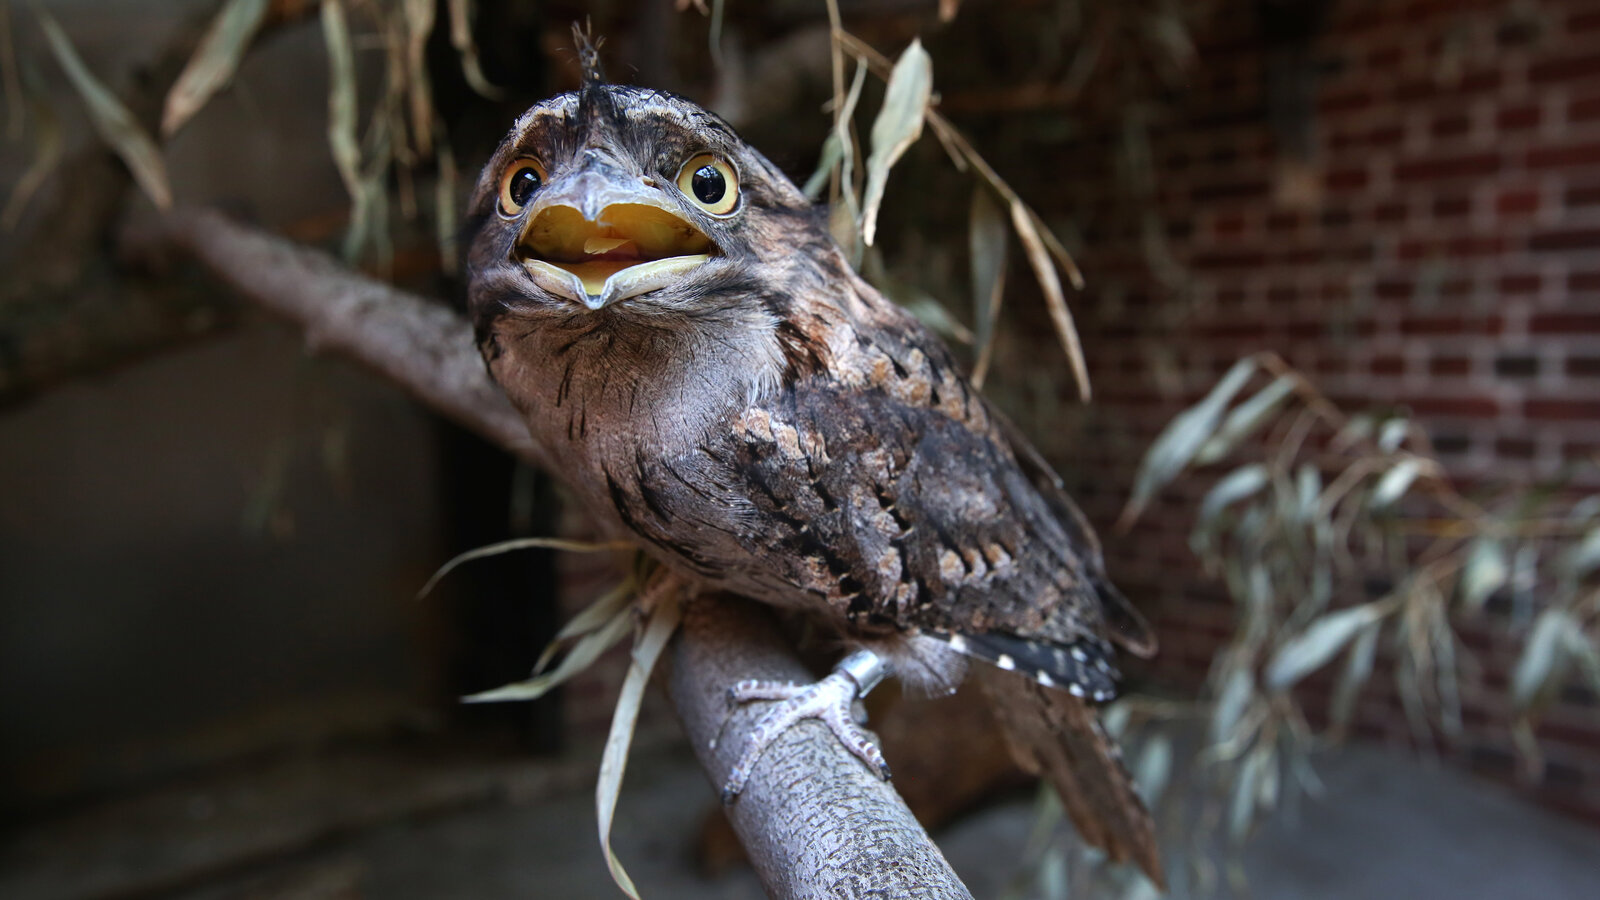 This 'Angry' Bird Is the Most Photogenic, Research Finds